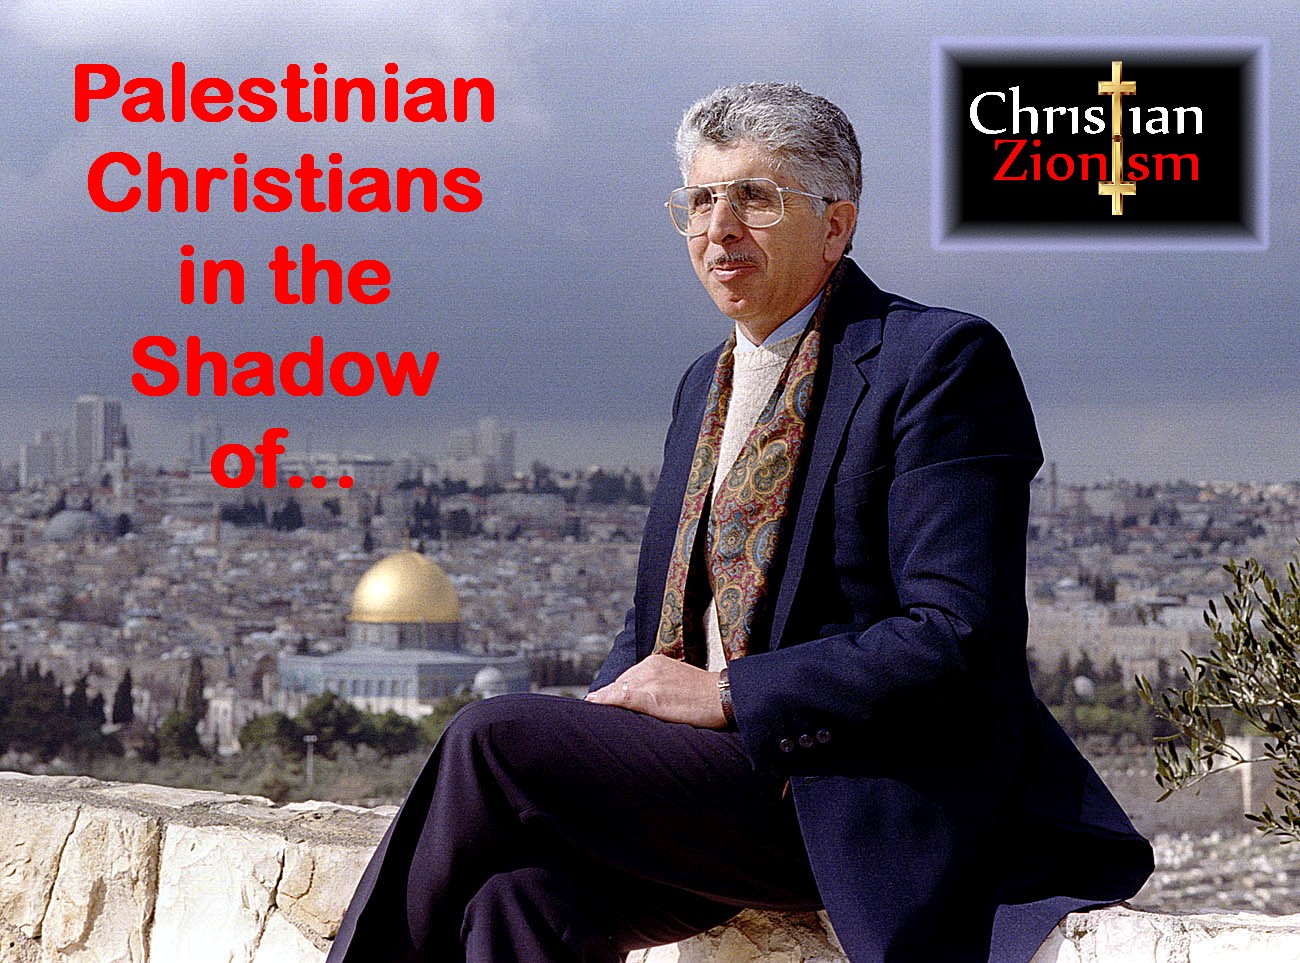 Palestinian Christians In The Shadow of Christian Zionism